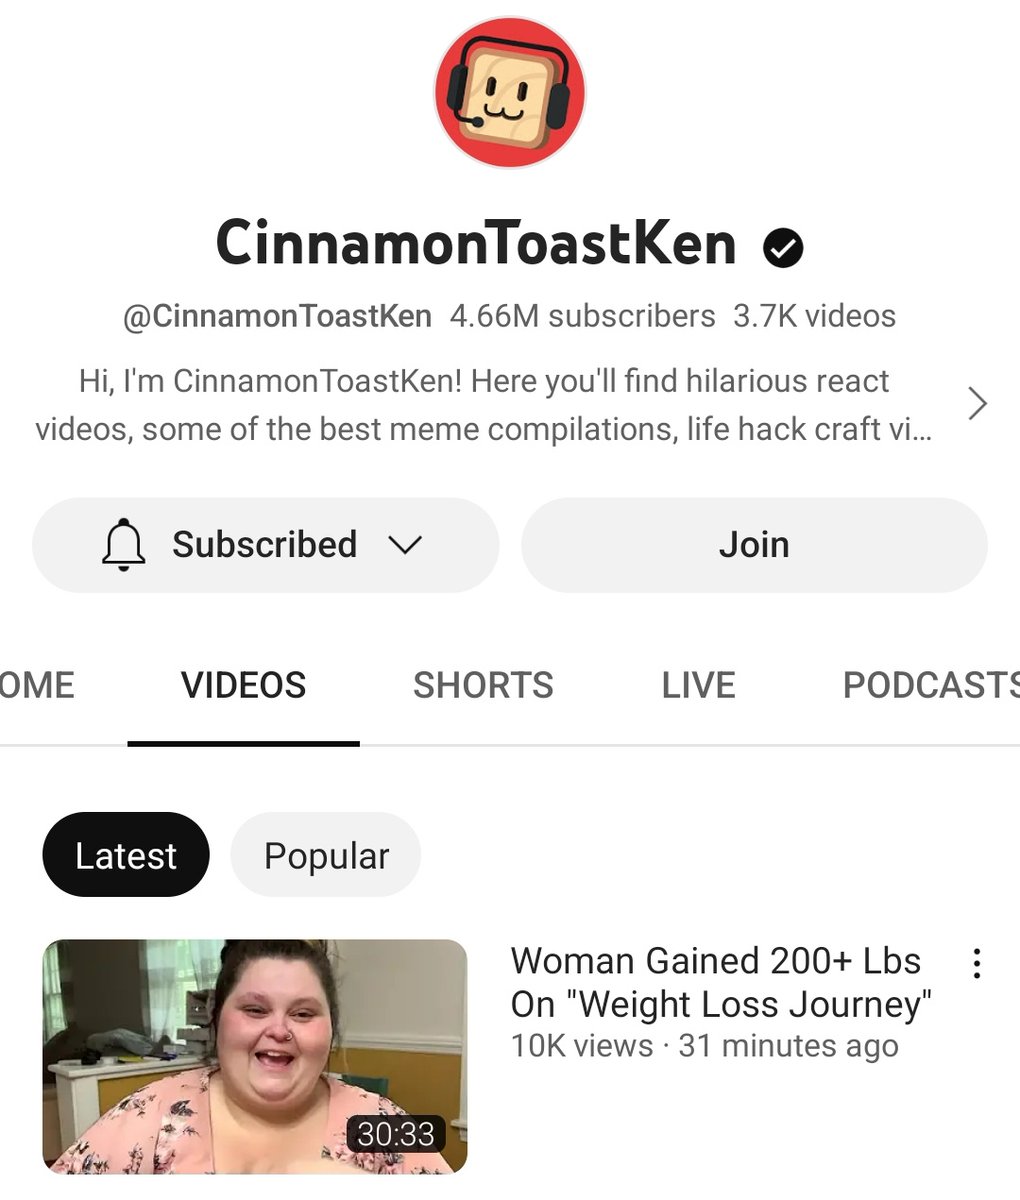 Not... CINNAMON TOAST KEN doing a video on amberlynn ried 😭😭

Almost 5mil subs 💀